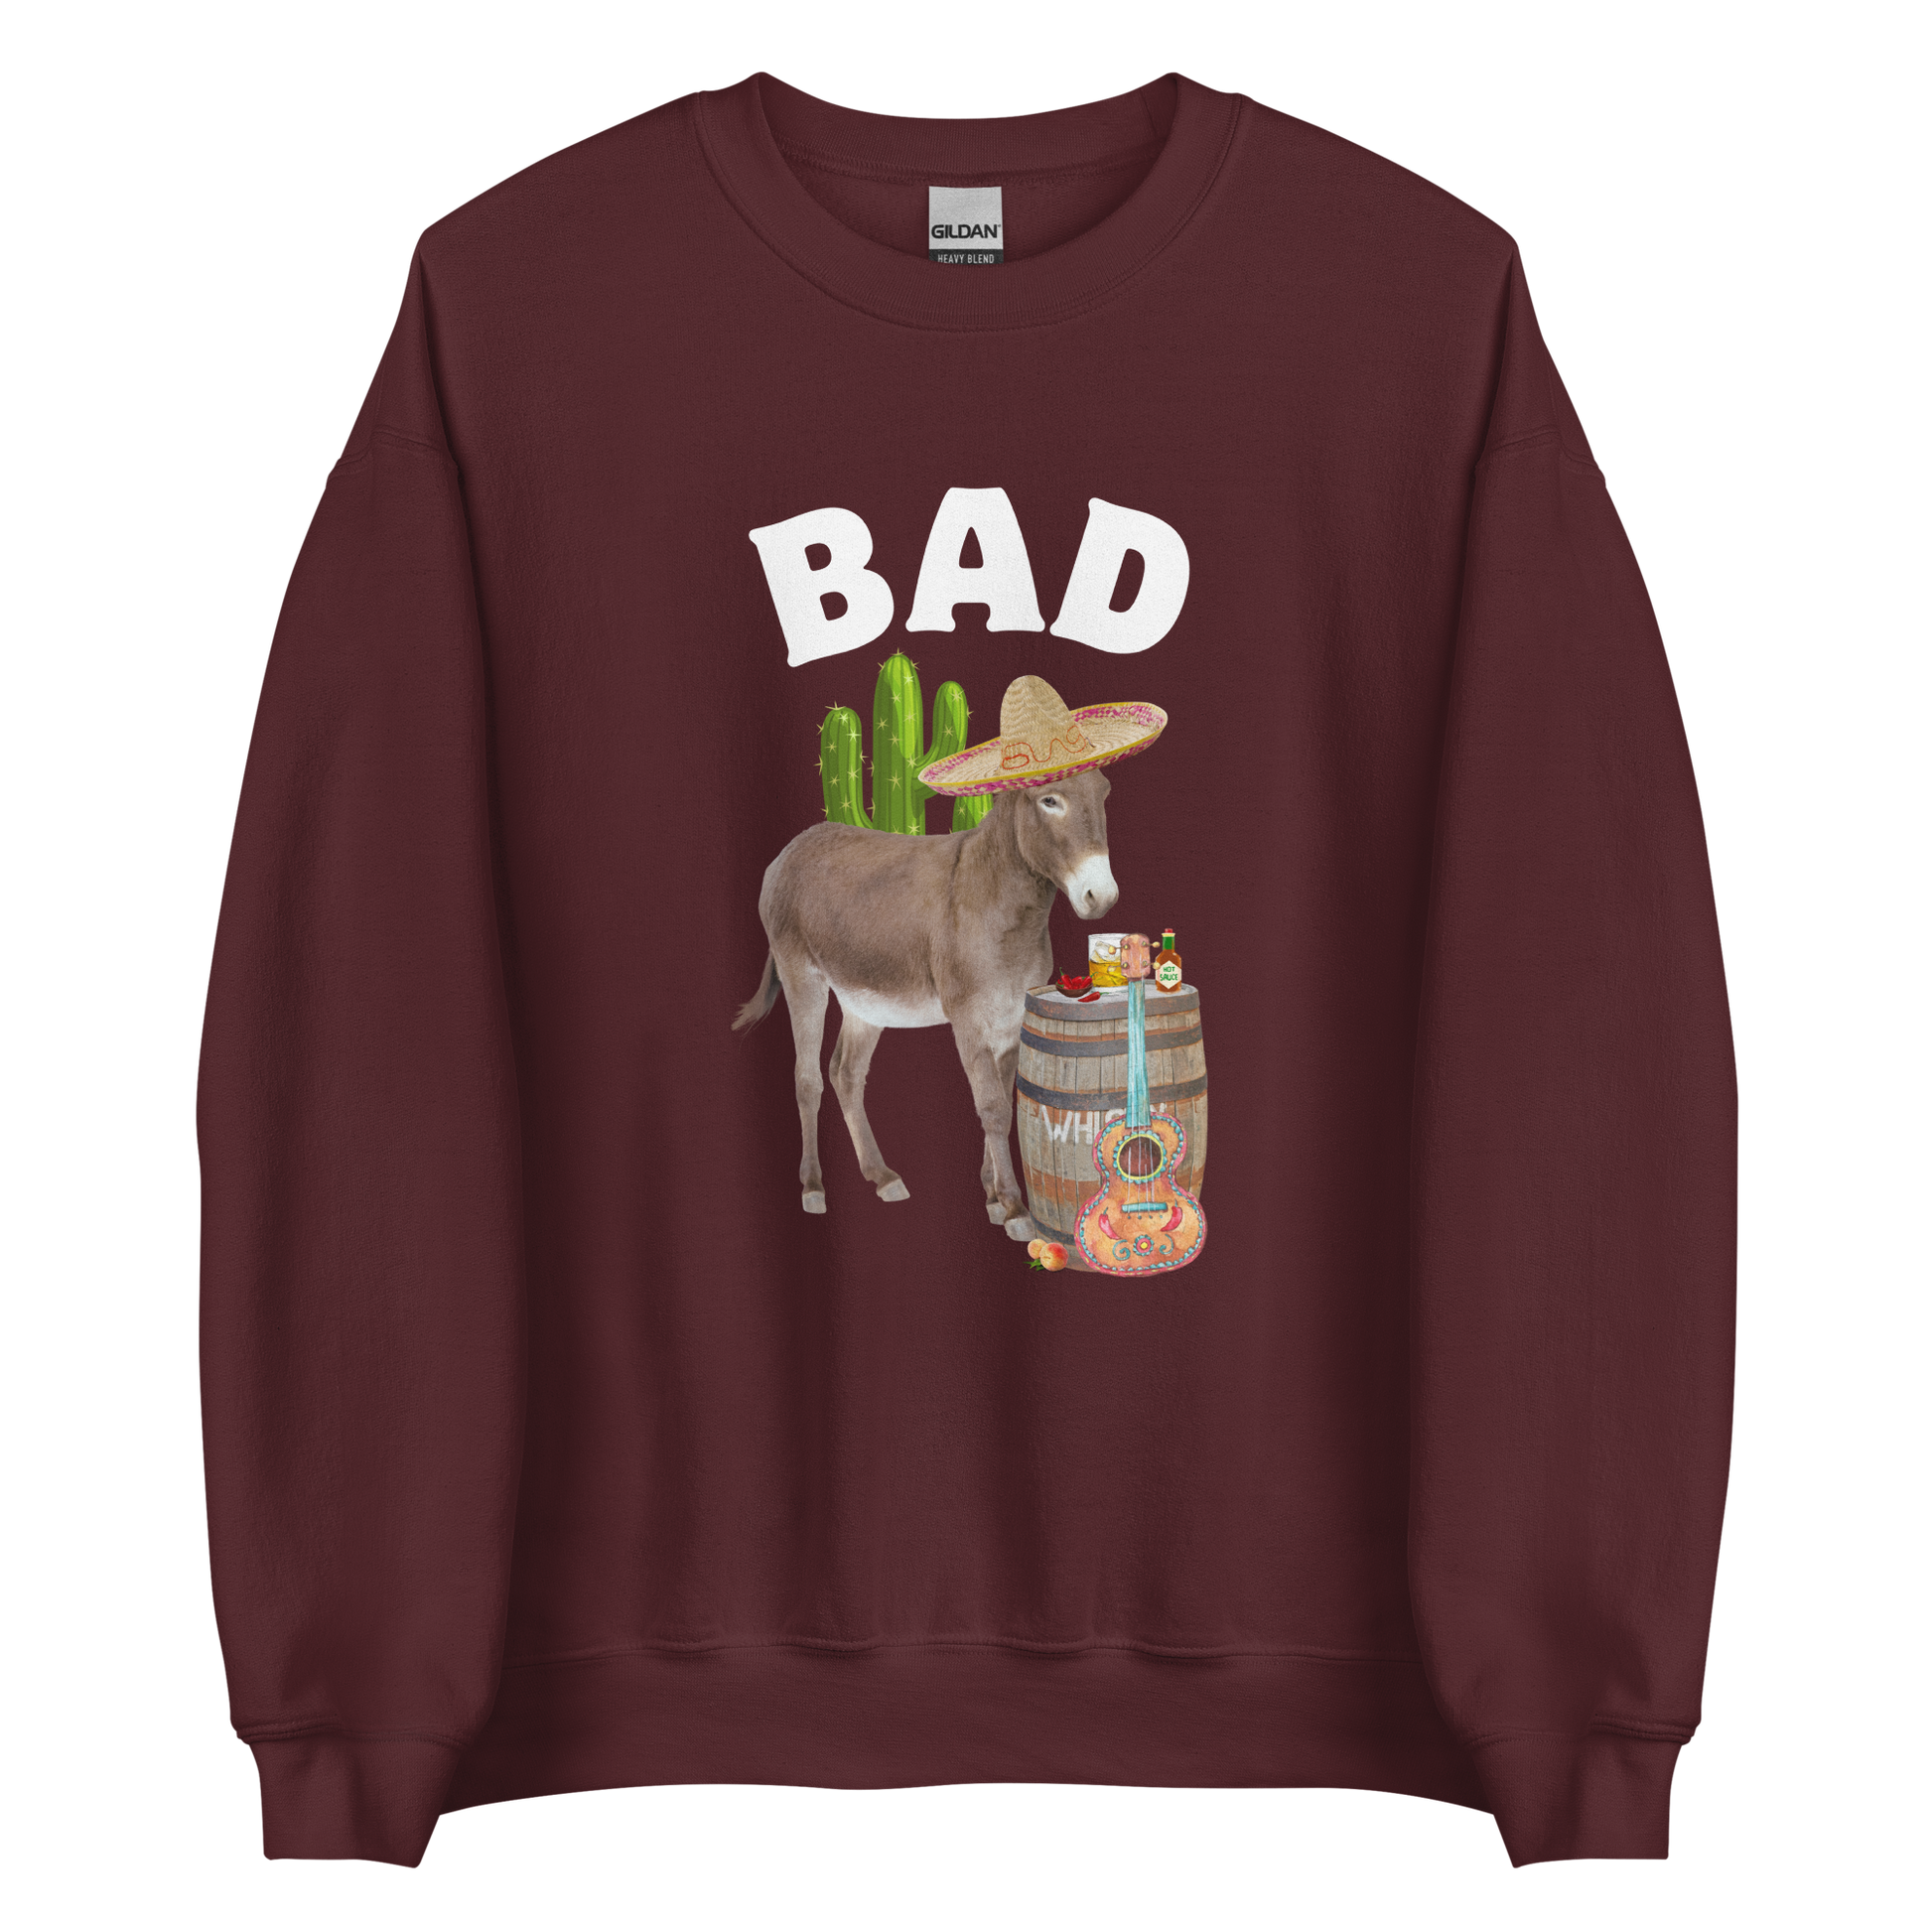 Maroon Donkey Sweatshirt featuring a Funny Bad Ass Donkey graphic on the chest - Funny Graphic Bad Ass Donkey Sweatshirts - Boozy Fox